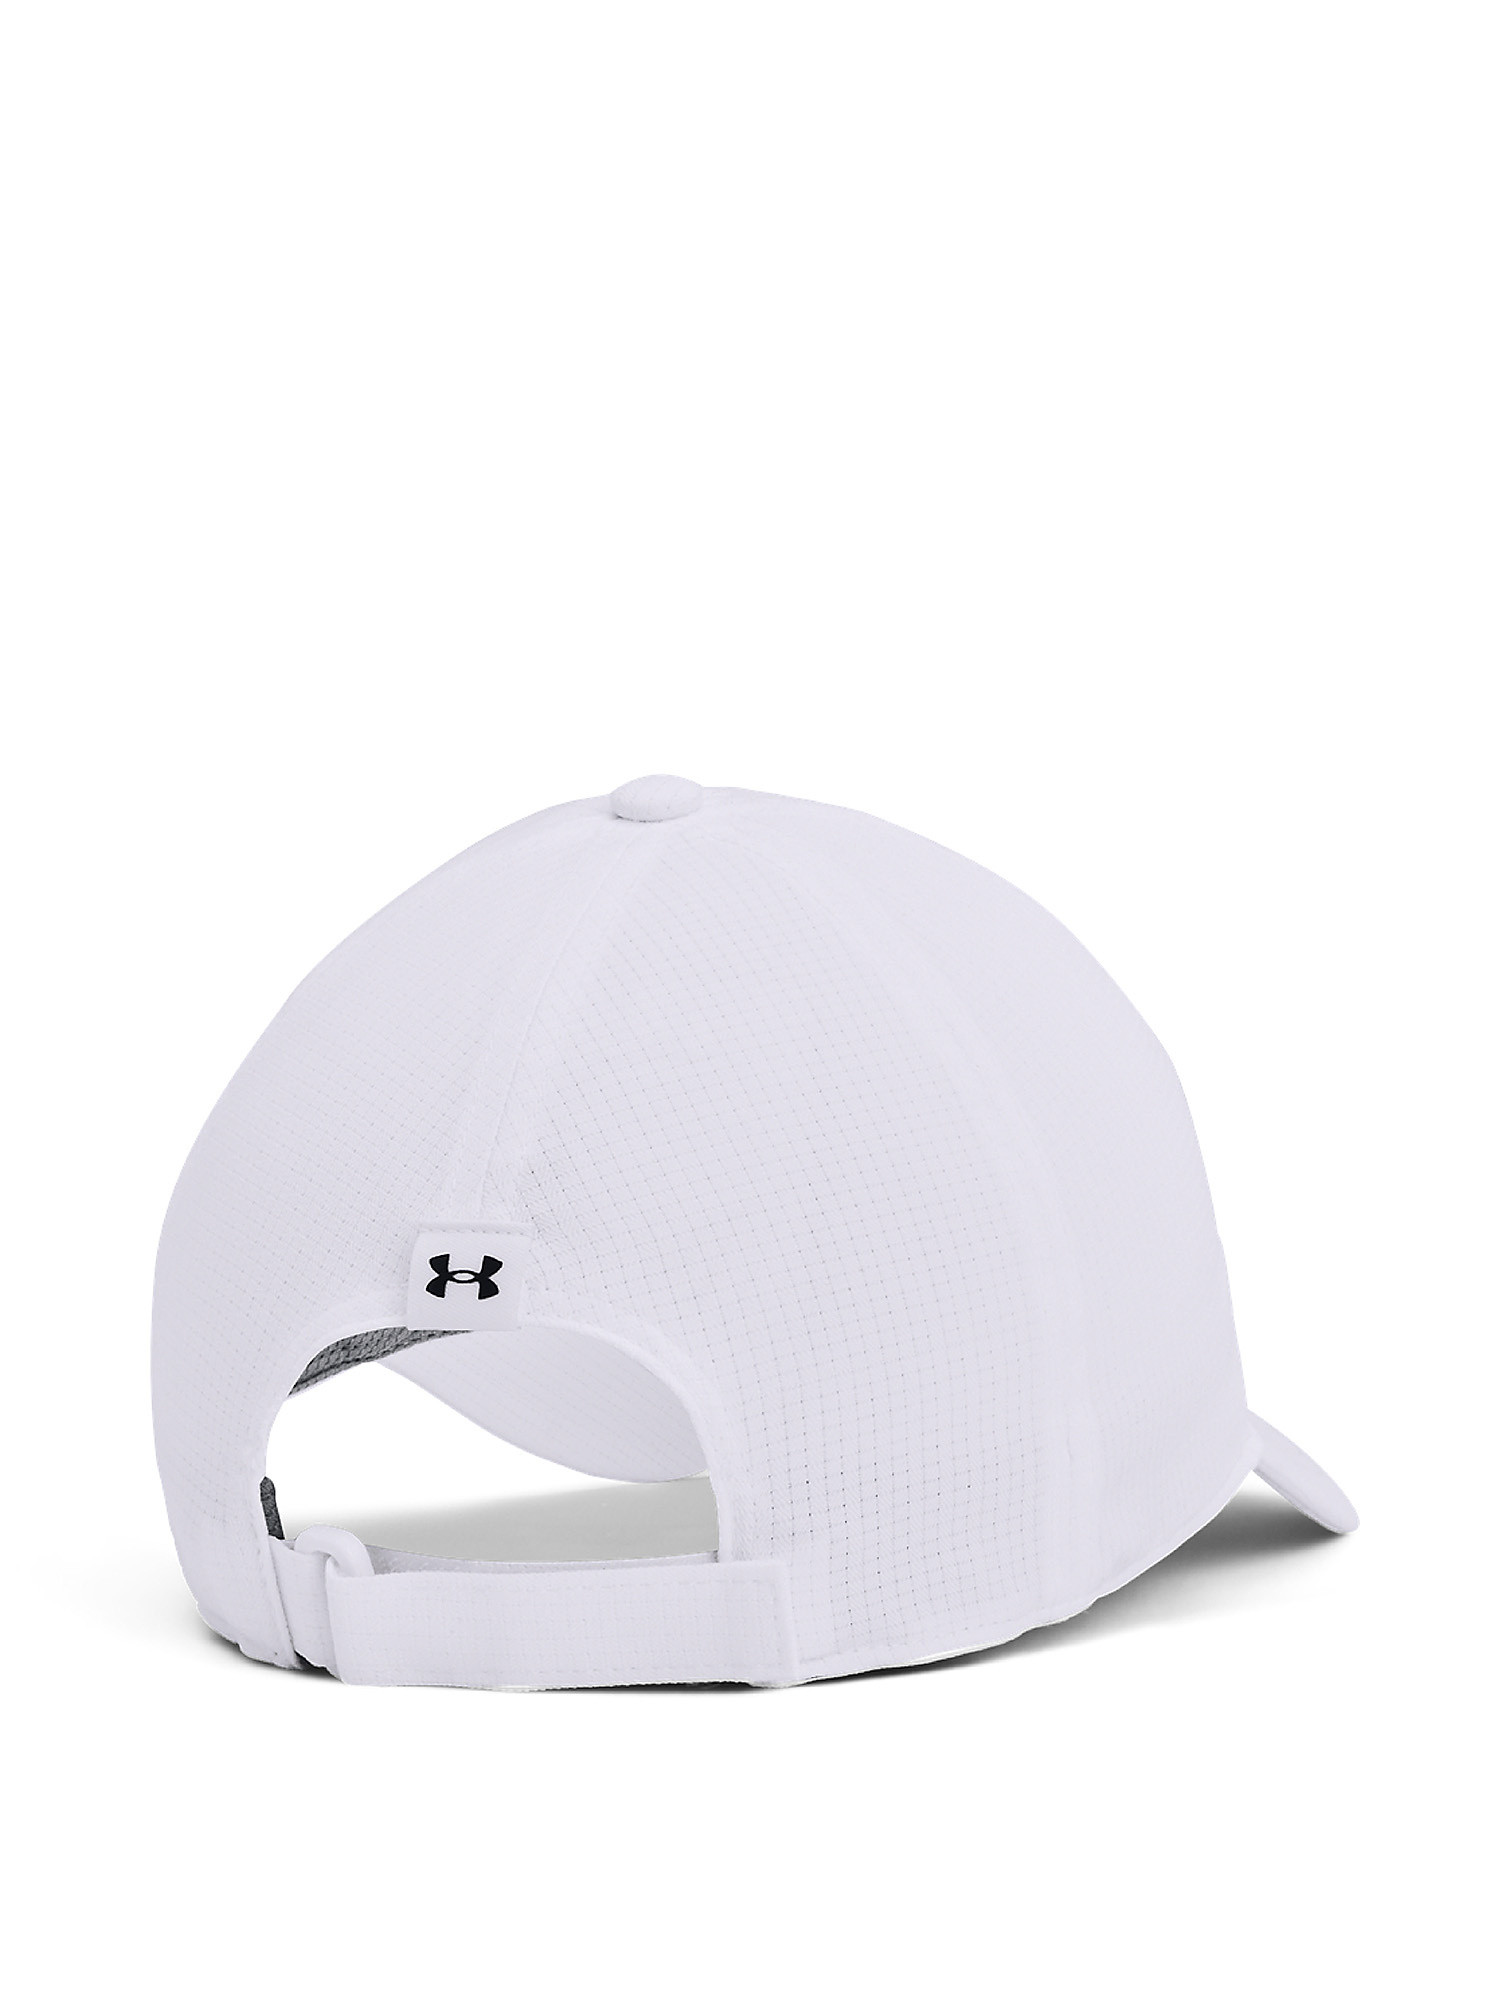 Under Armour - Cappello UA Iso-Chill ArmourVent™ Adjustable, Bianco, large image number 1